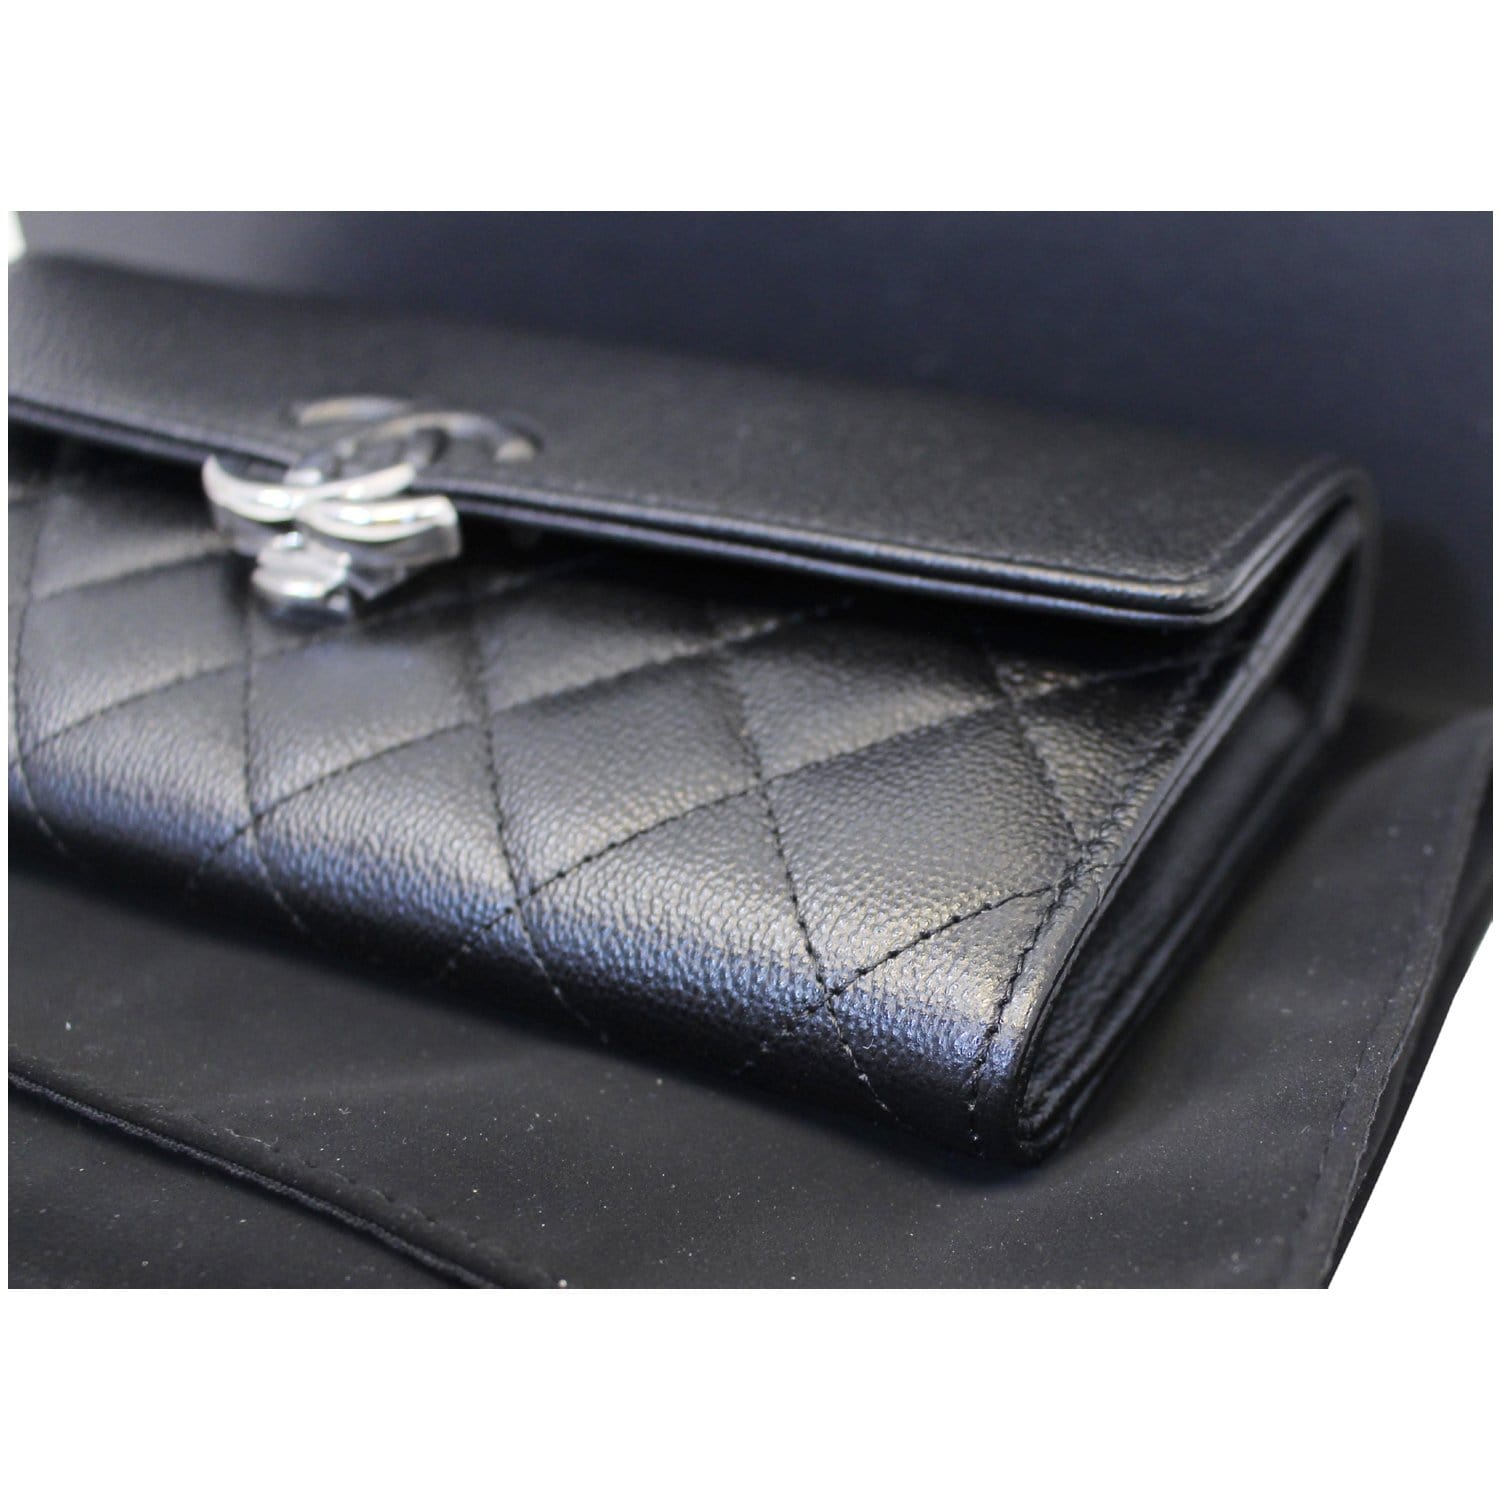 Chanel Classic Small Flap Wallet In Grained Calfskin With Silver Hardware  (Wallets and Small Leather Goods,Wallets)